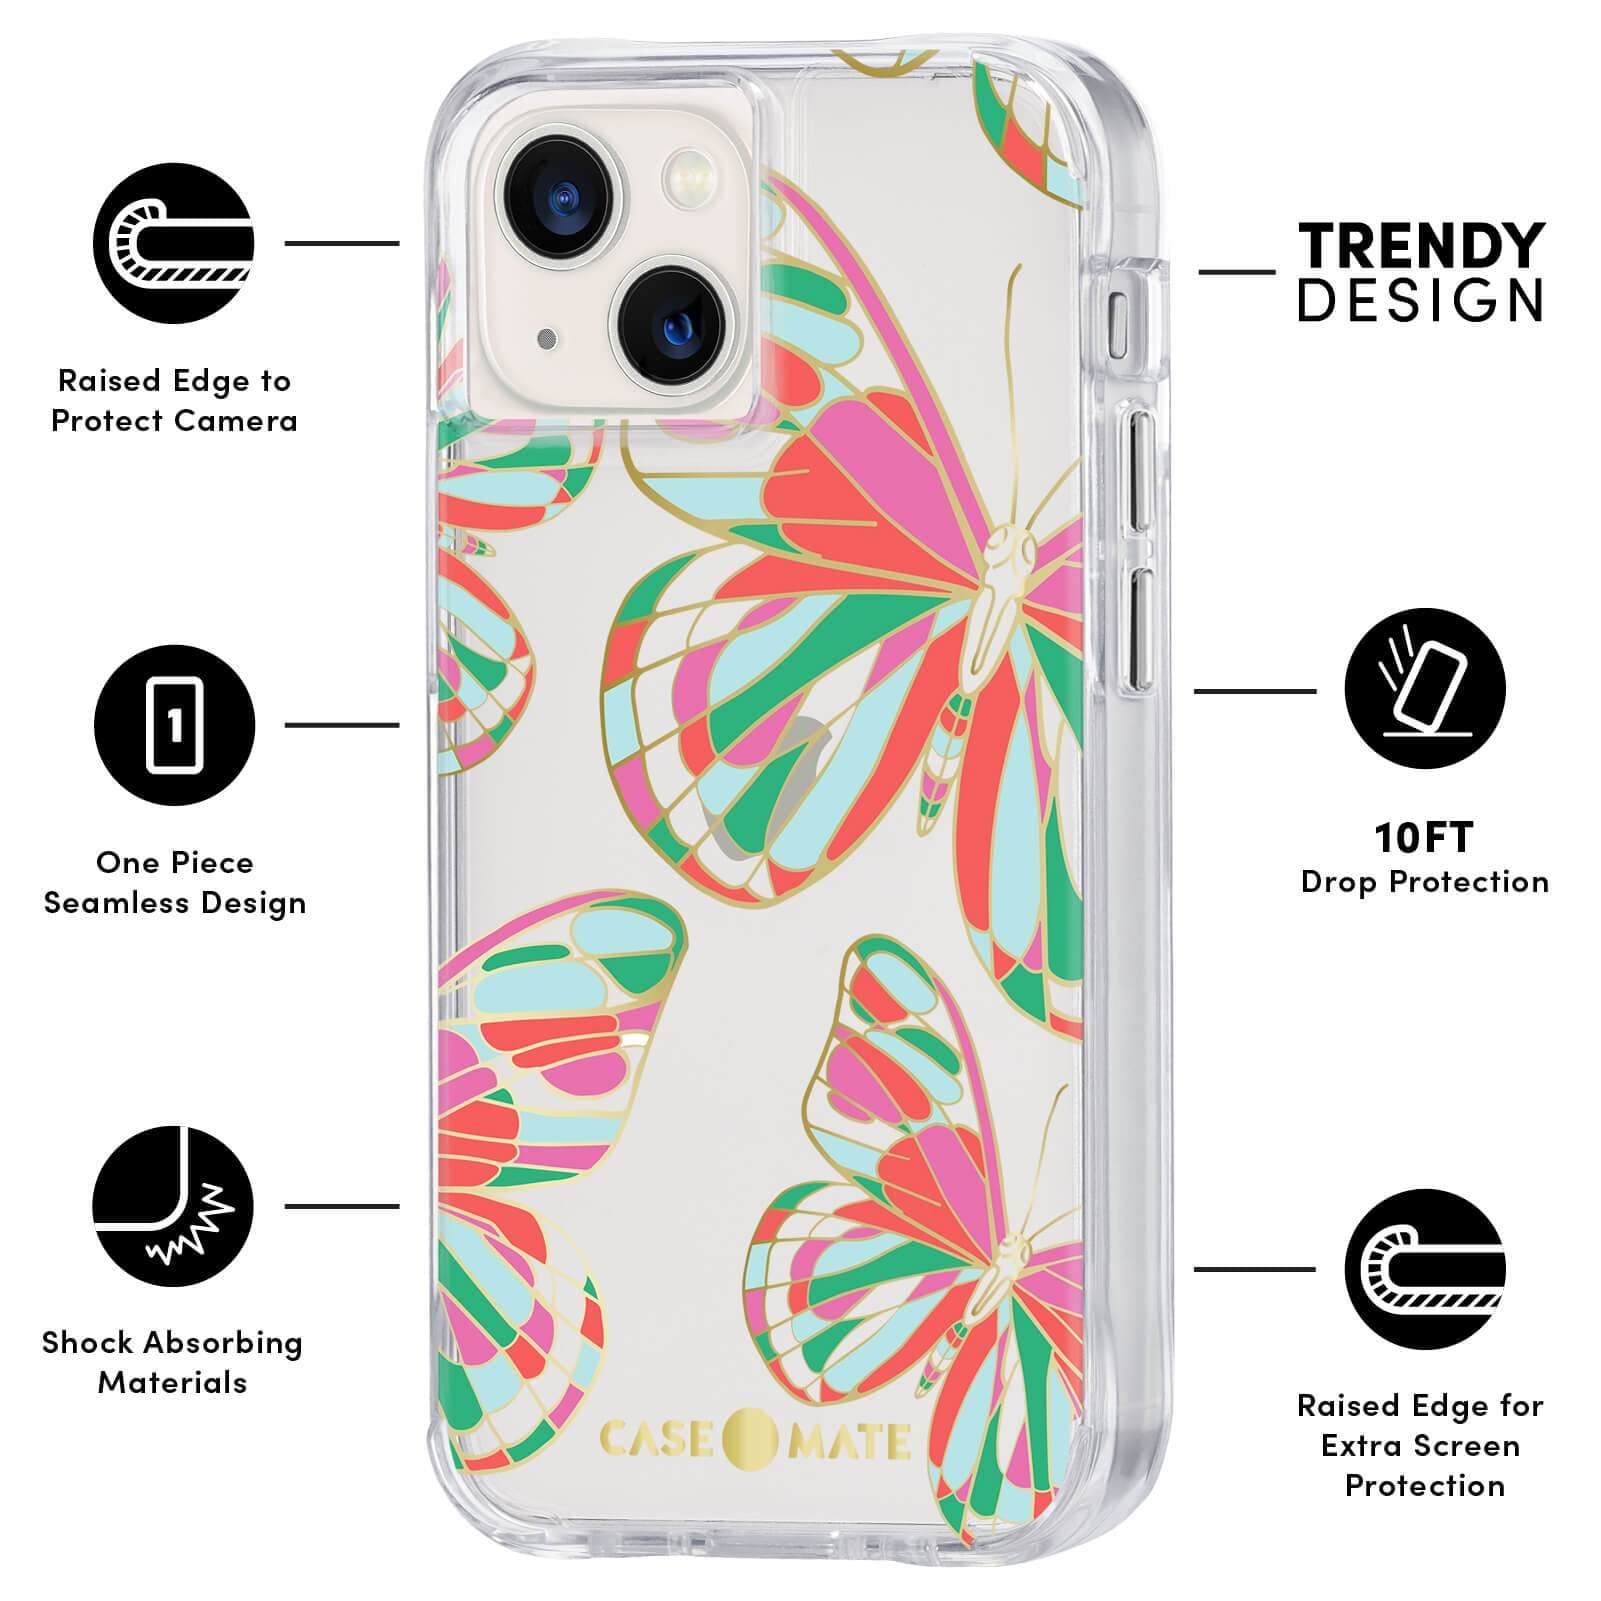 FEATURES: RAISED EDGE TO PROTECT CAMERA, ONE PIECE SEAMLESS DESIGN, SHOCK ABSORBING MATERIALS, TRENDY DESIGN, 10 FT DROP PROTECTION, RAISED EDGE FOR EXTRA SCREEN PROTECTION. COLOR::BUTTERFLIES